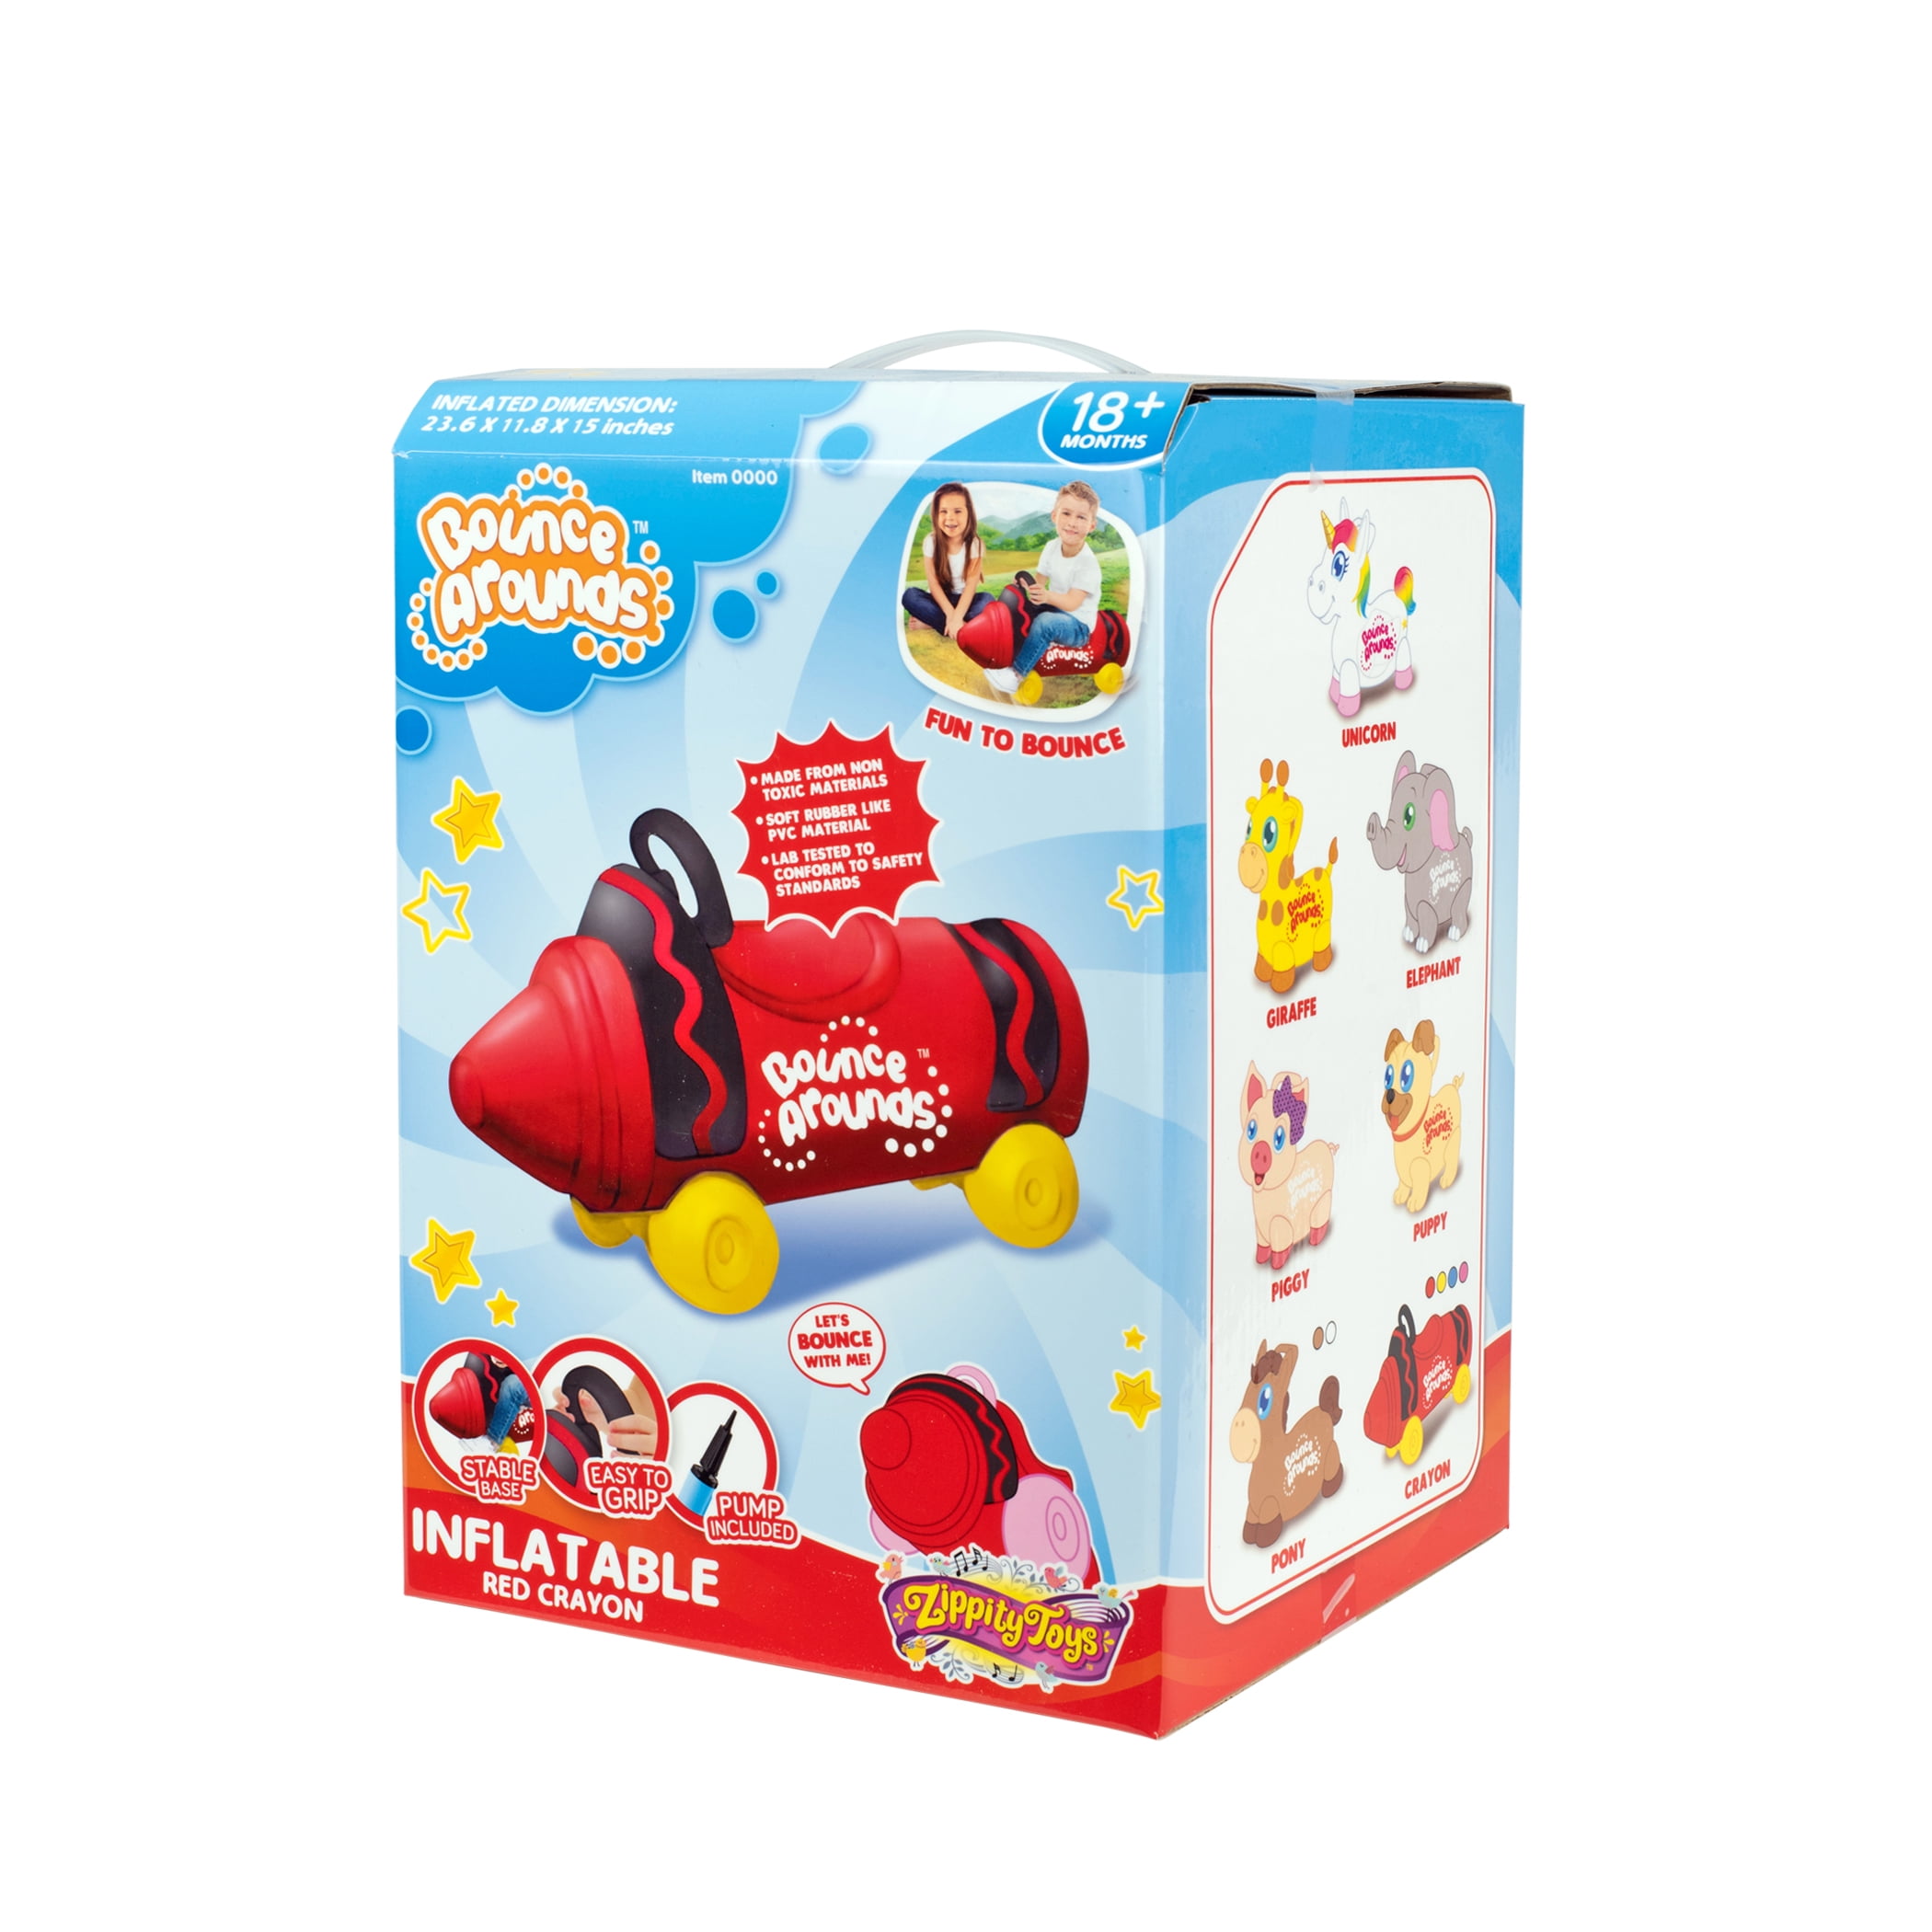 Zippity Toys Bounce Around Inflatable Red Crayon, Ages 18 Months